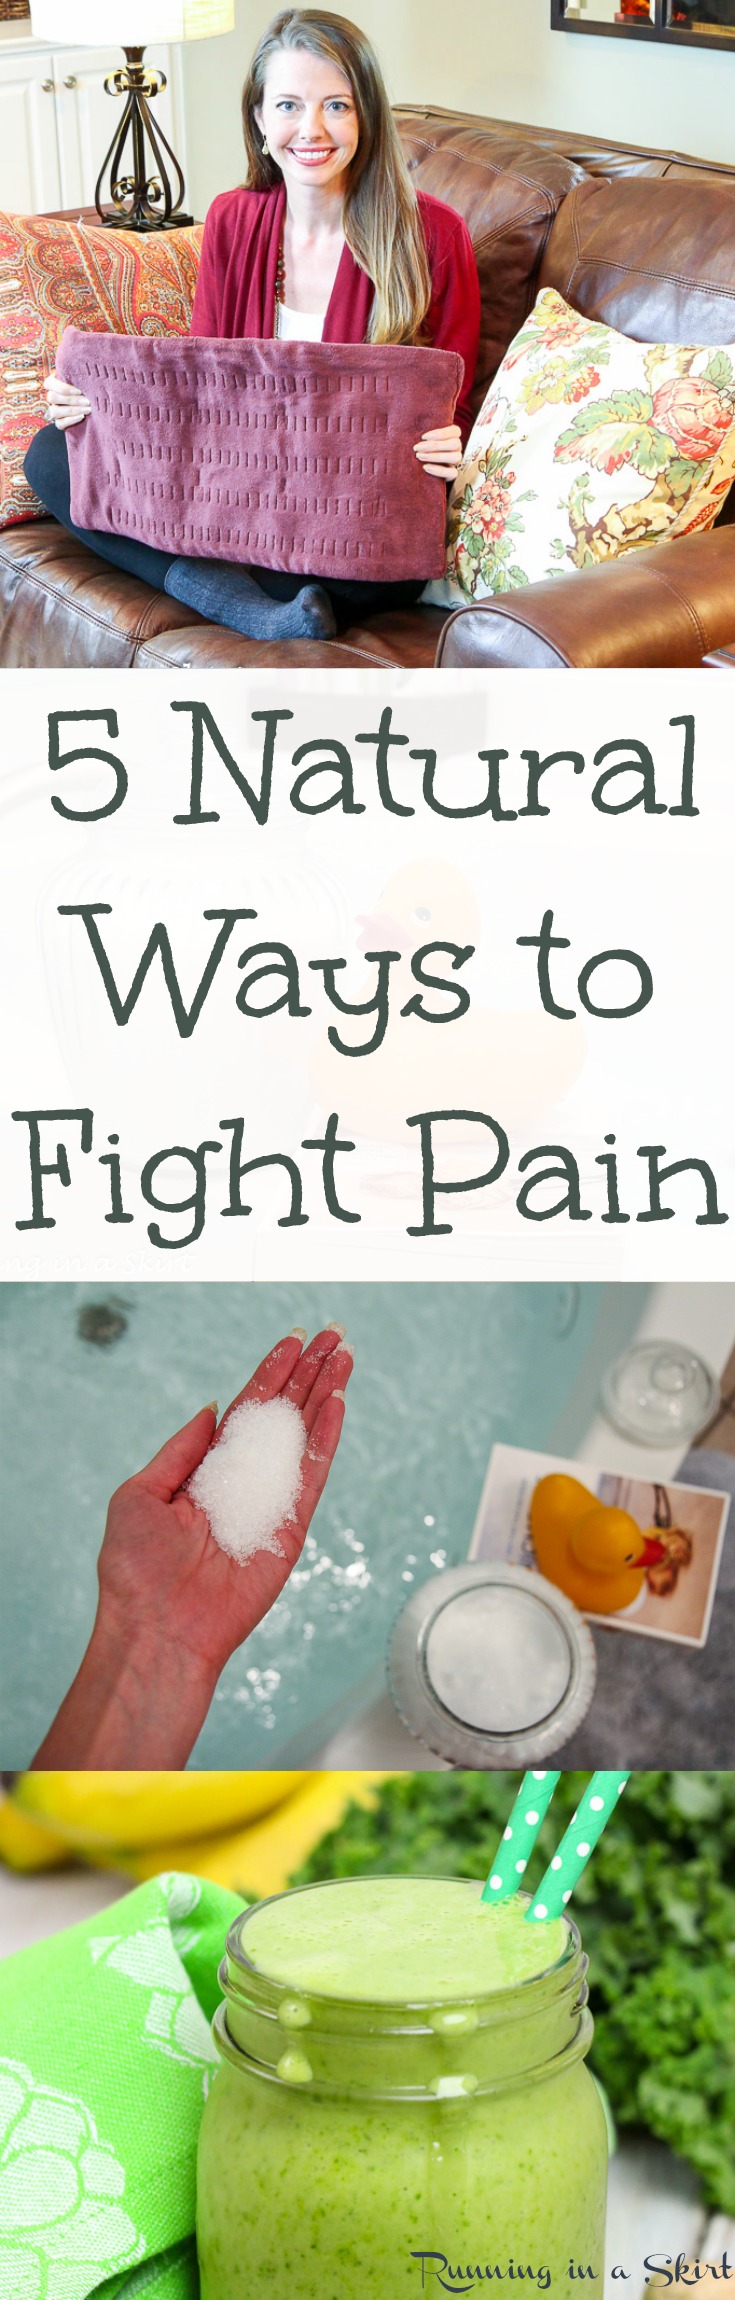 5 Natural Cures for Pain